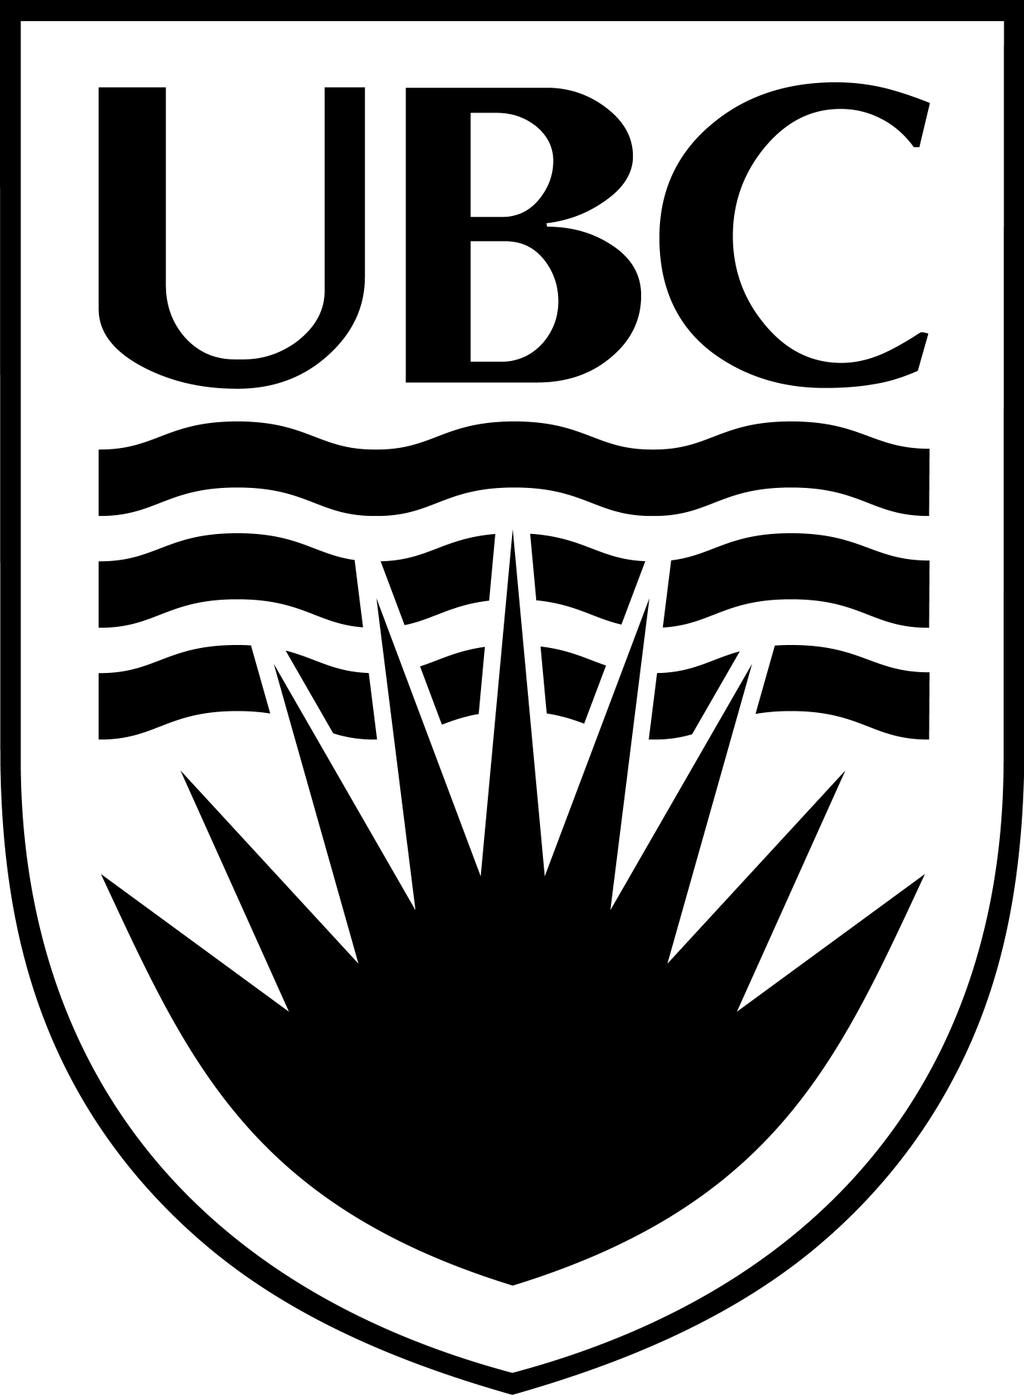 UNIVERSITY OF BRITISH COLUMBIA DEPARTMENT OF ELECTRICAL AND COMPUTER